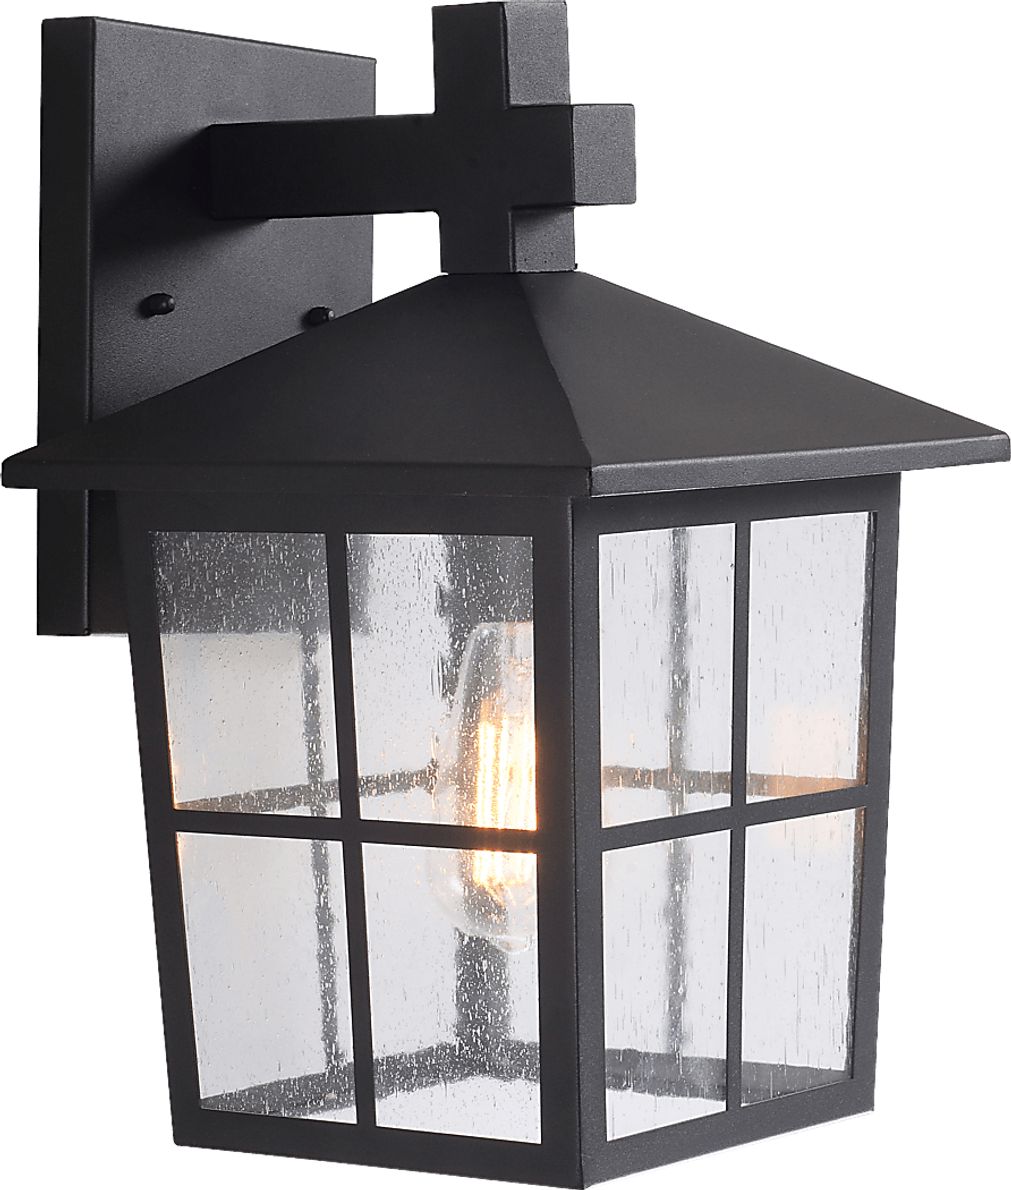 Heiry Park Charcoal Sconce